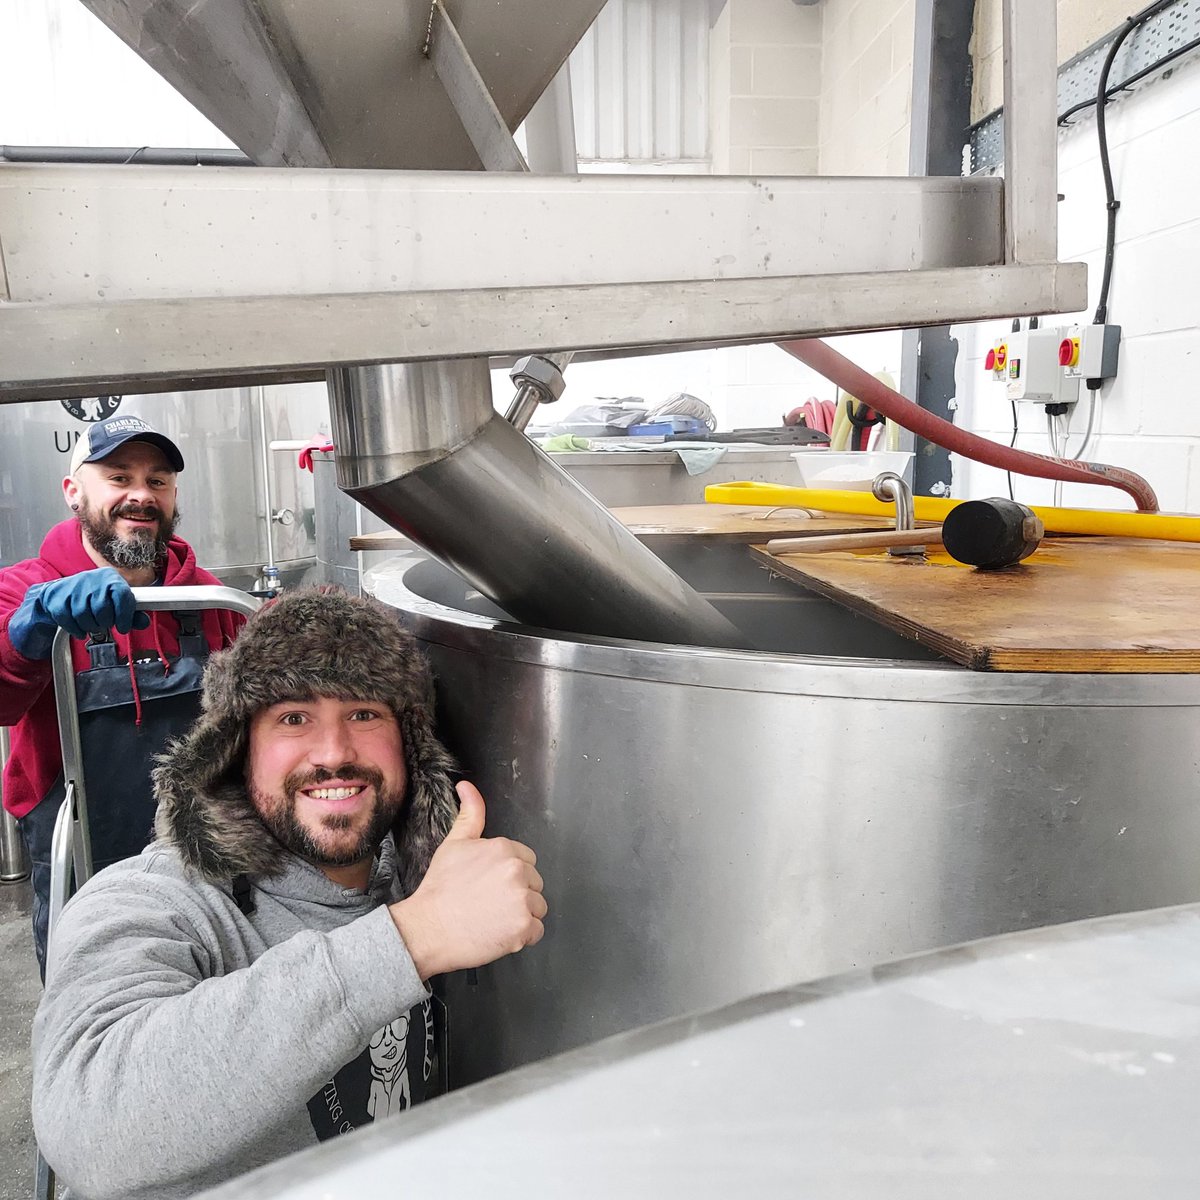 We're mashing in a BRAND NEW BEER today and just in time for Spring (hopefully) beating Winter into submission over the coming days 🙏🙏🙏 More information to follow later 🍺🥰🔥